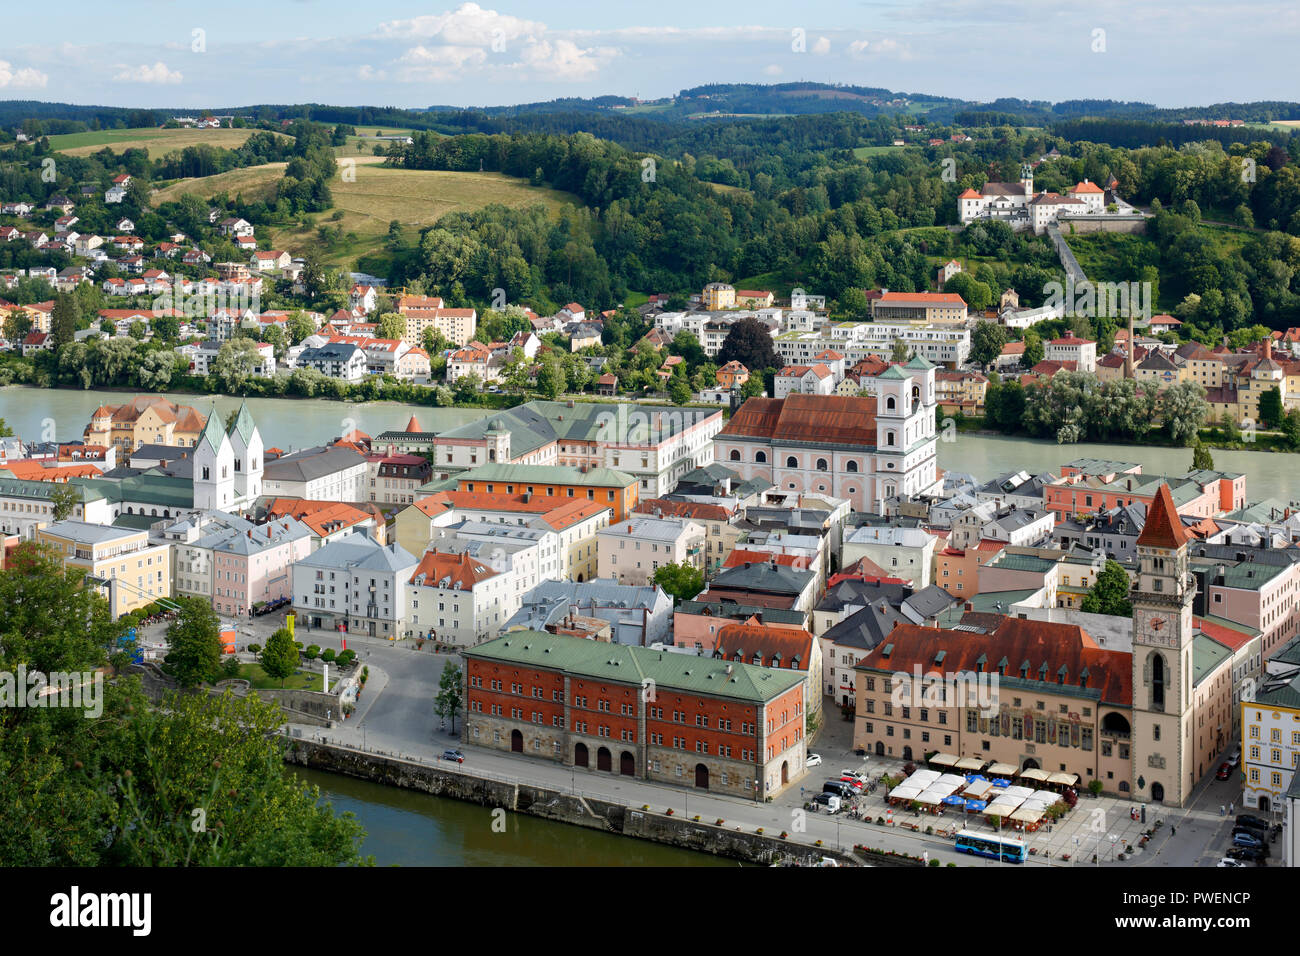 D-Passau, Danube, Inn, Ilz, panoramic view with Inn and Danube, old town, f.l.t.r. Monastery Niedernburg with tomb of the Blessed Gisella, former Benedictine nun monastery, Jesuits church St. Michael with Leopoldinum high school, former Jesuit college, pilgrimage church and monastery Saint Mary Help, town hall, baroque, river landscape, Inn landscape Stock Photo